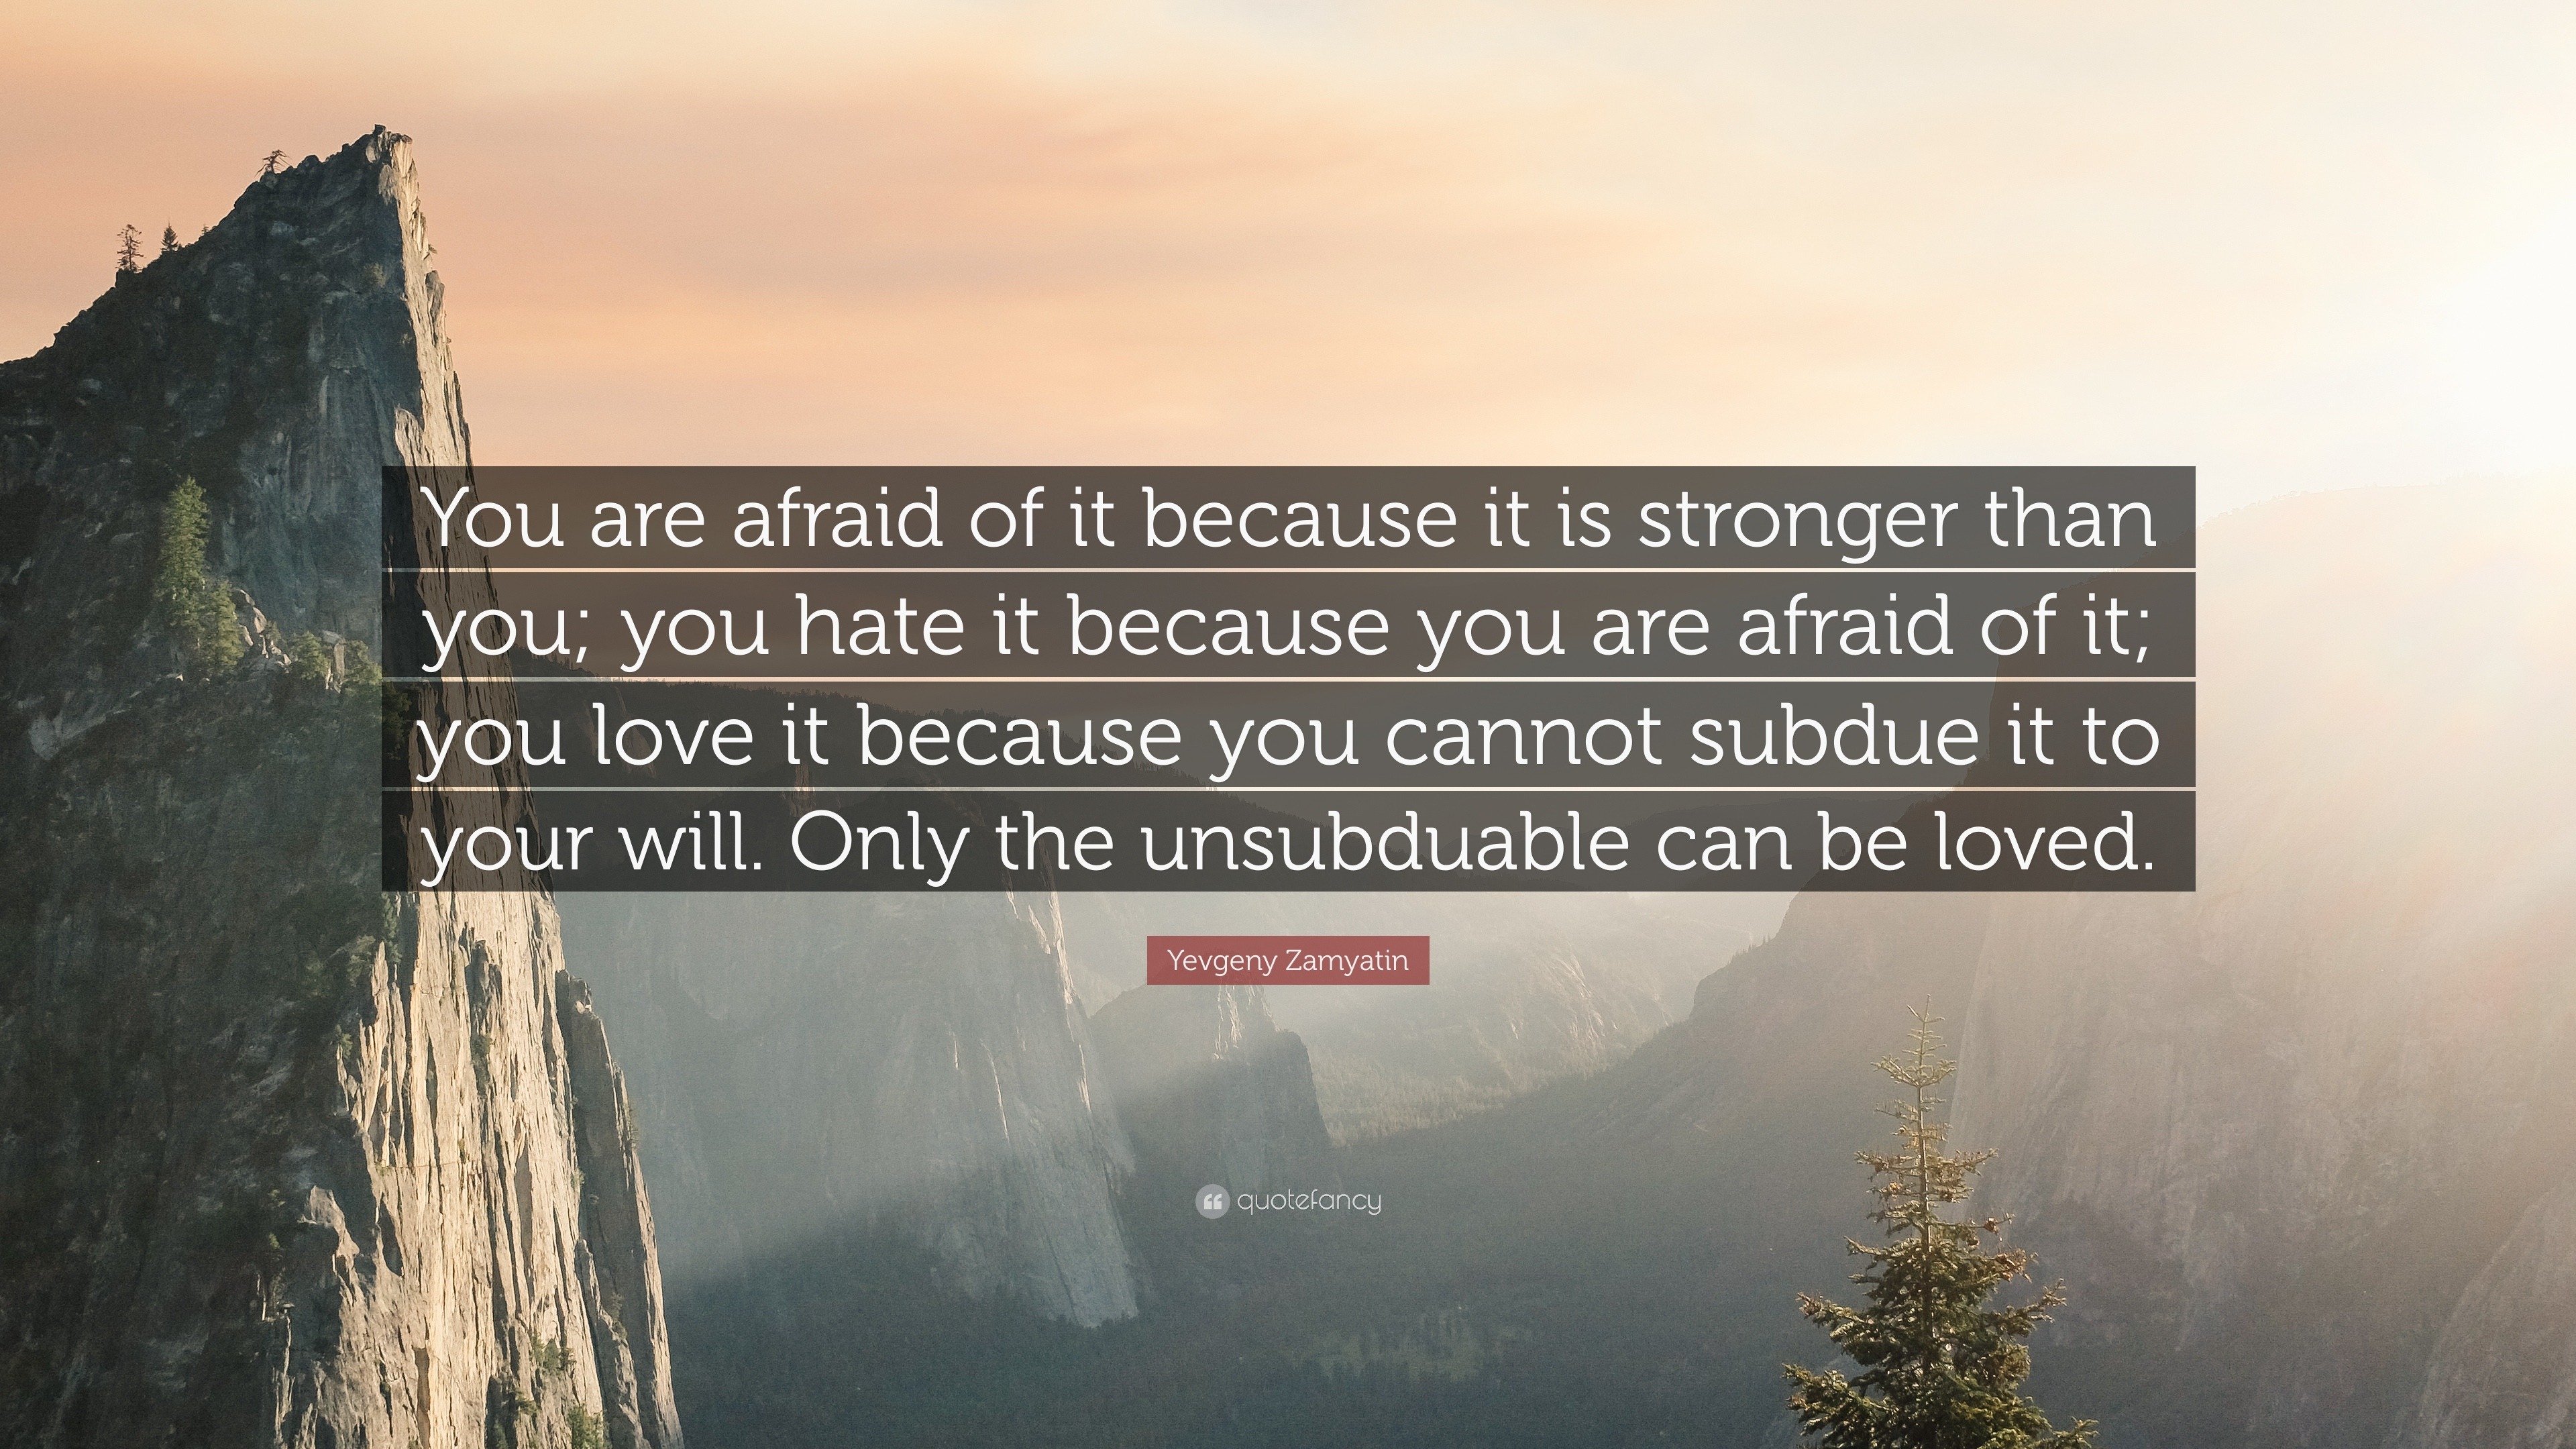 Yevgeny Zamyatin Quote “You are afraid of it because it is stronger than you